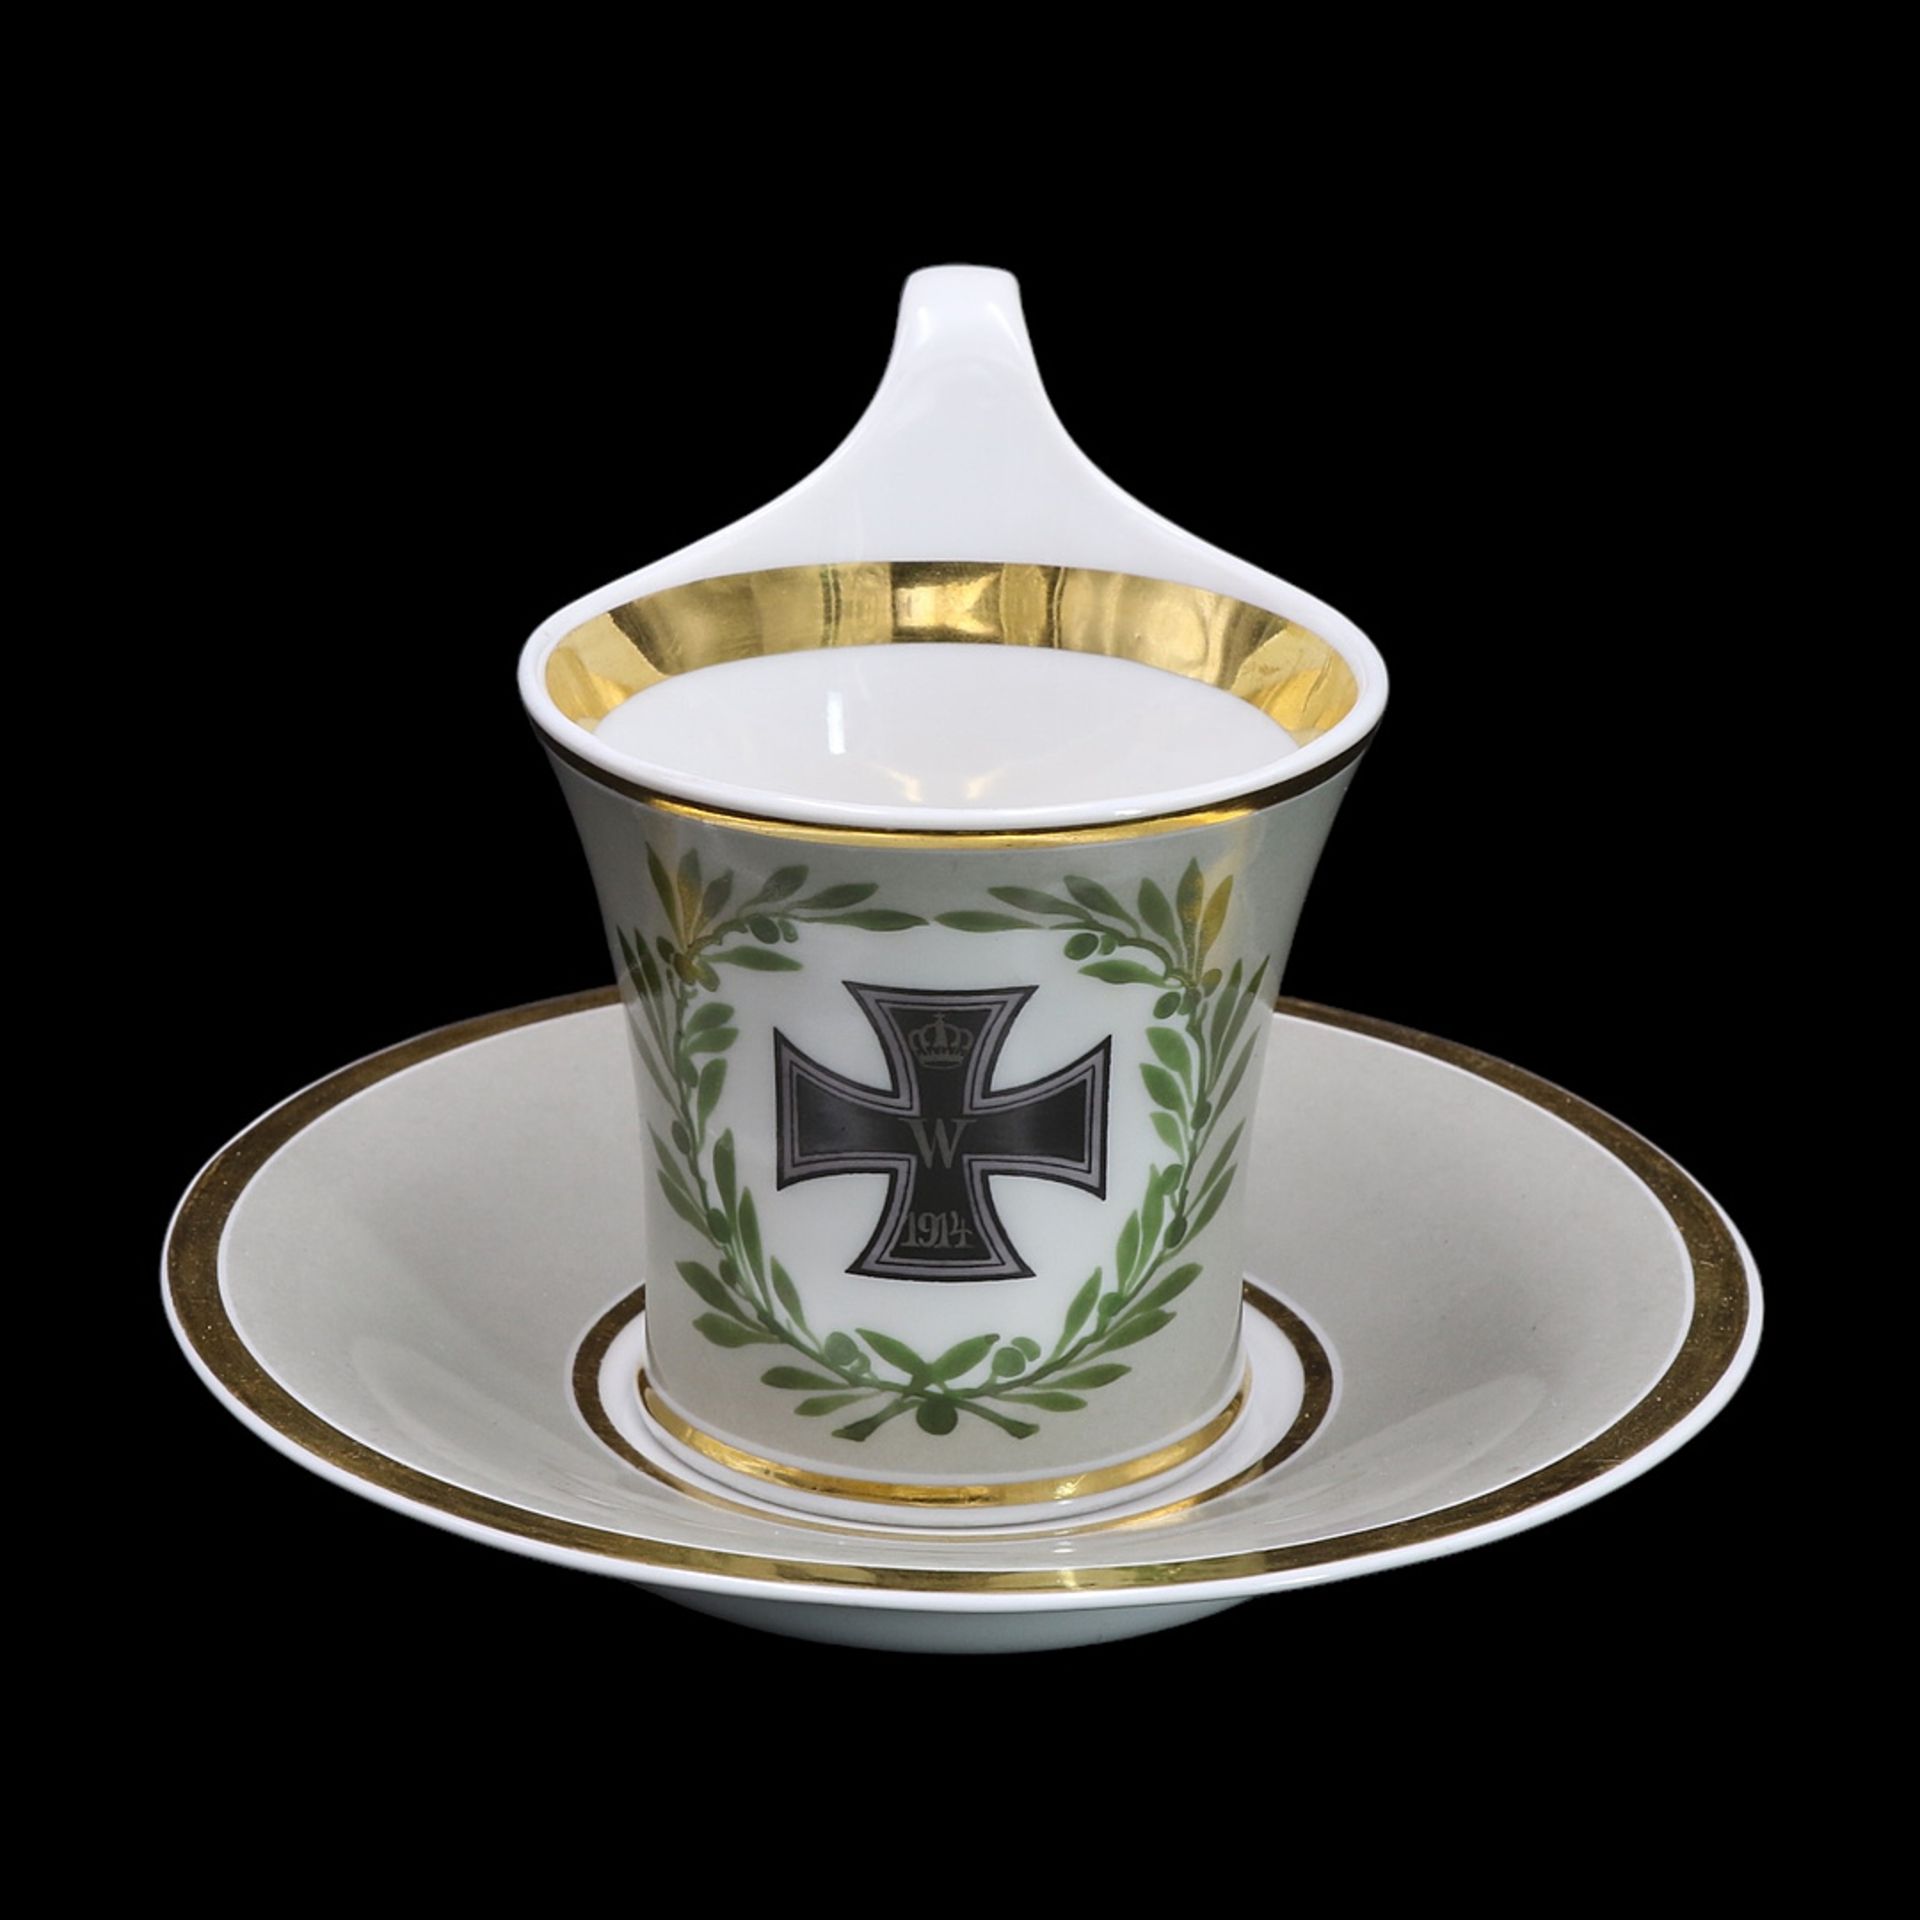 KPM Berlin cup with "Iron Cross" and saucer - Image 2 of 6